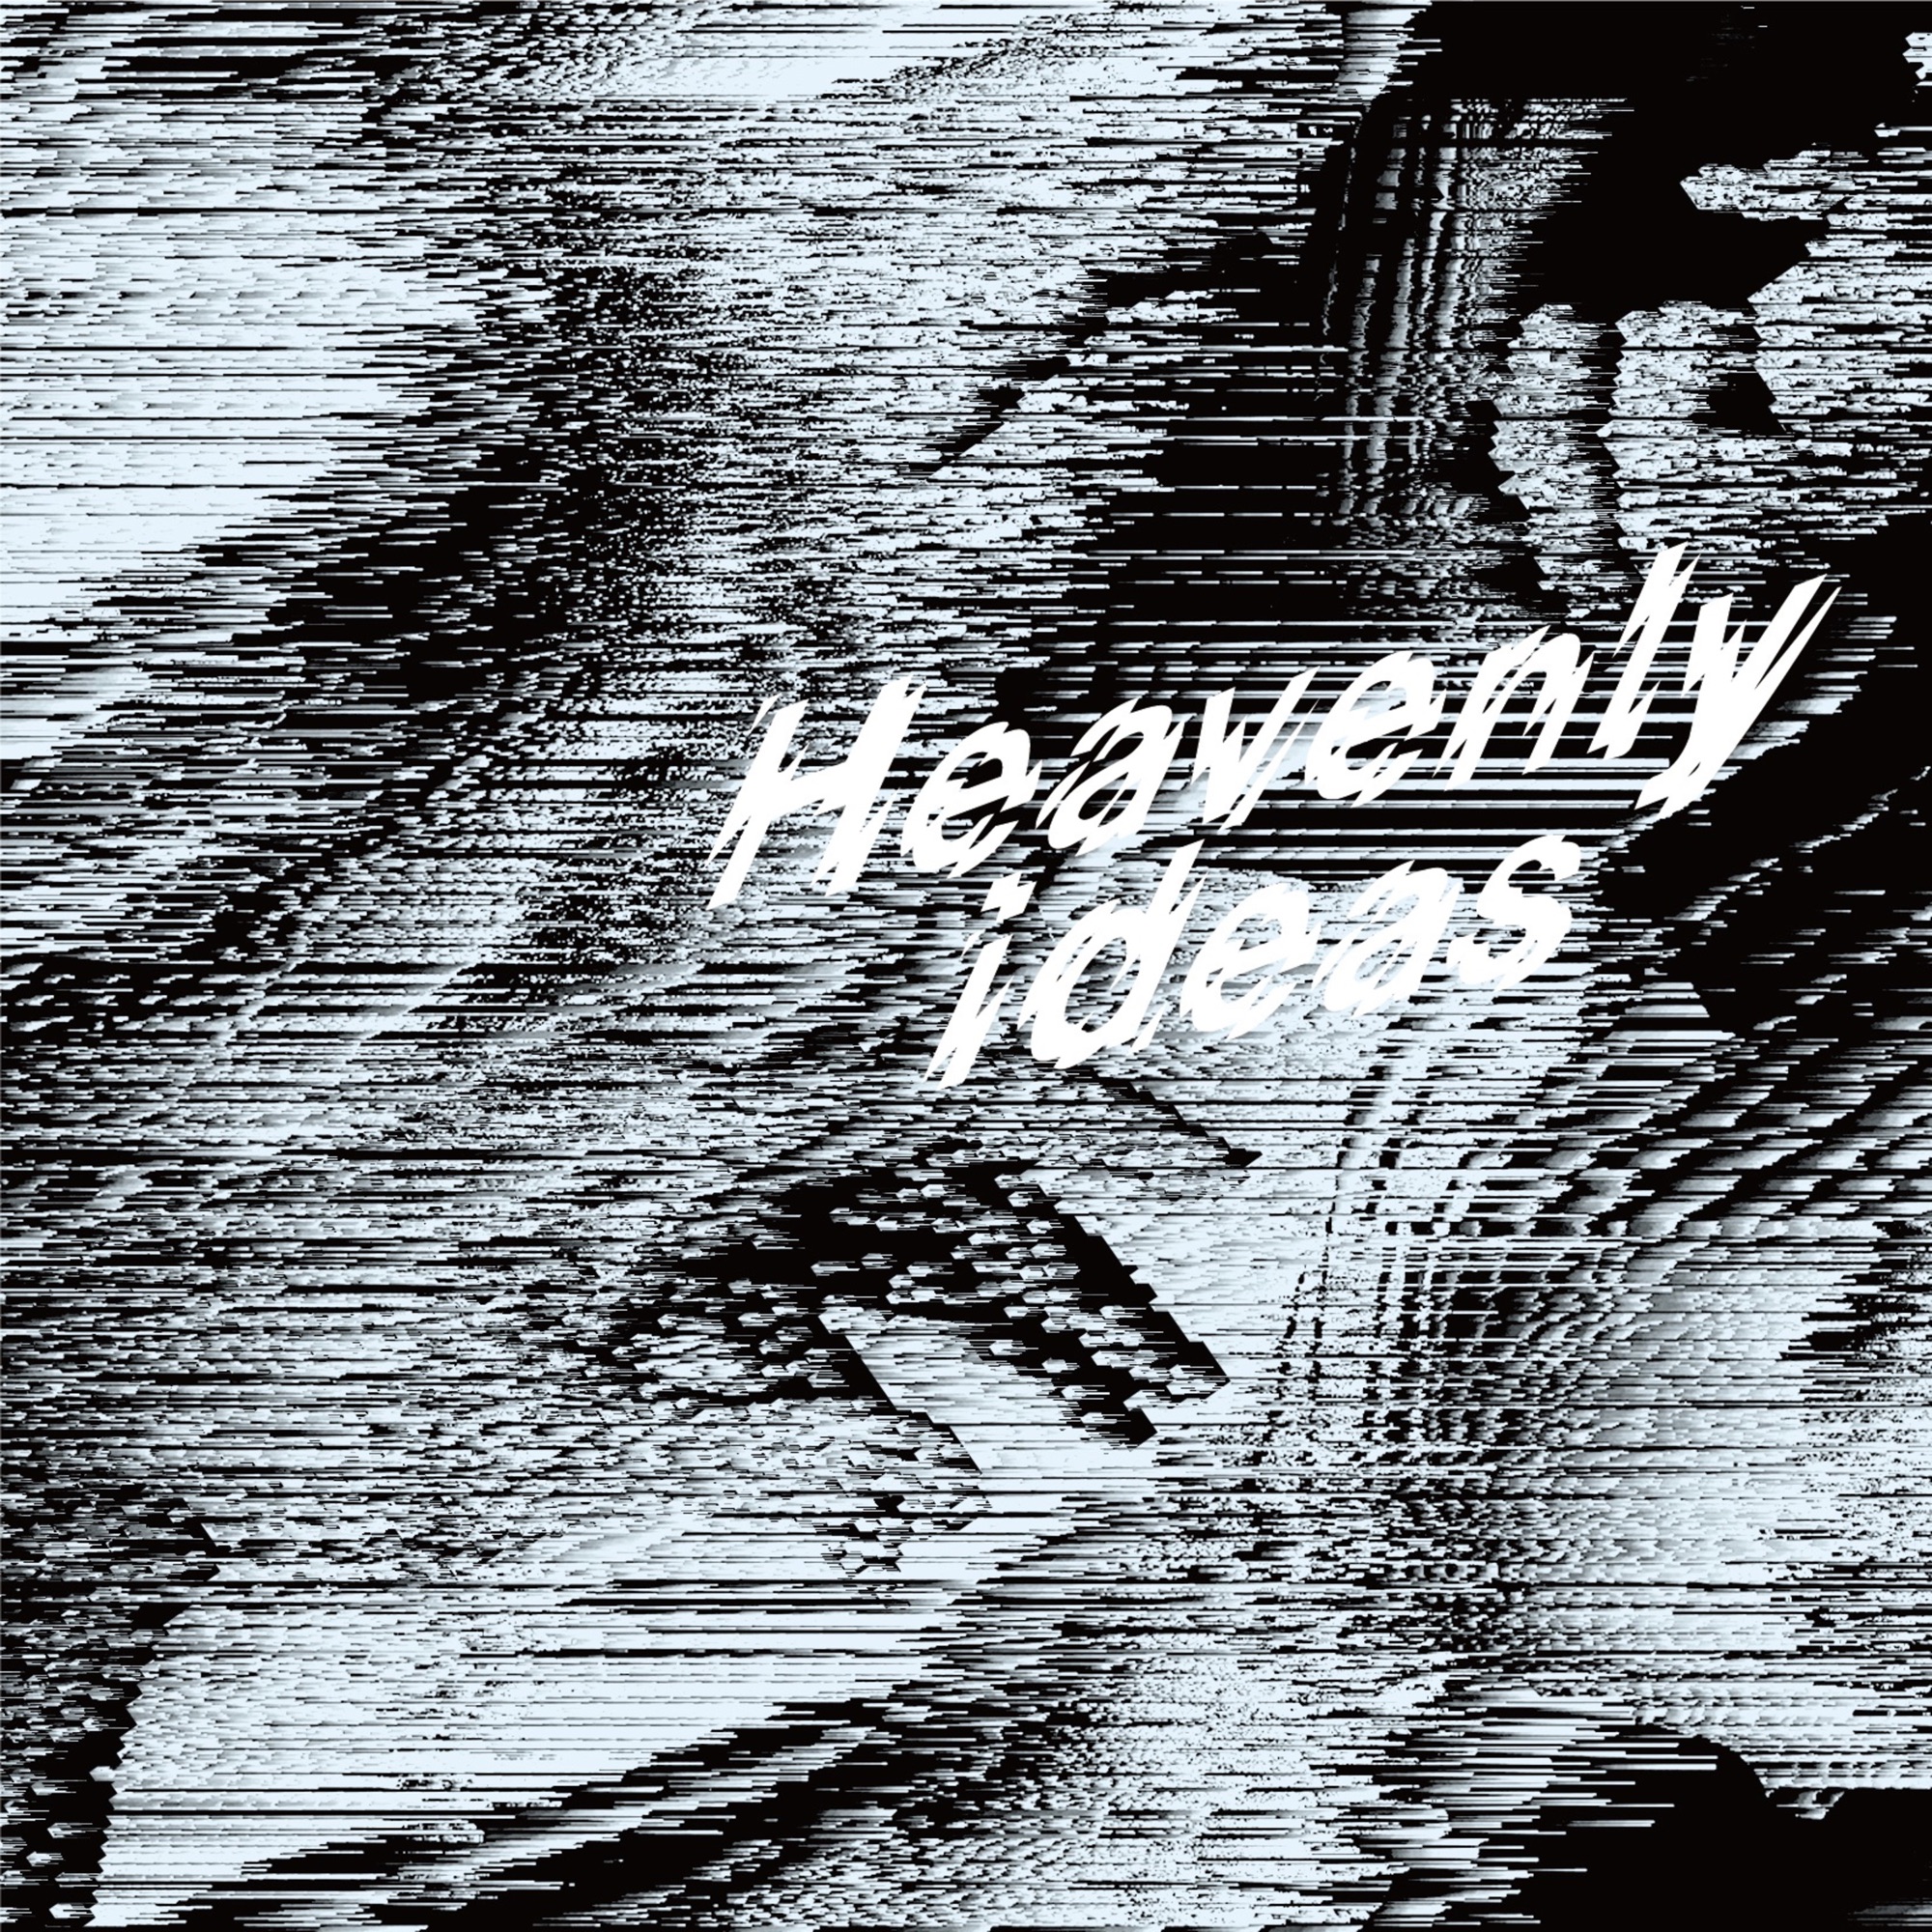 Thinking Dogs - Heavenly ideas